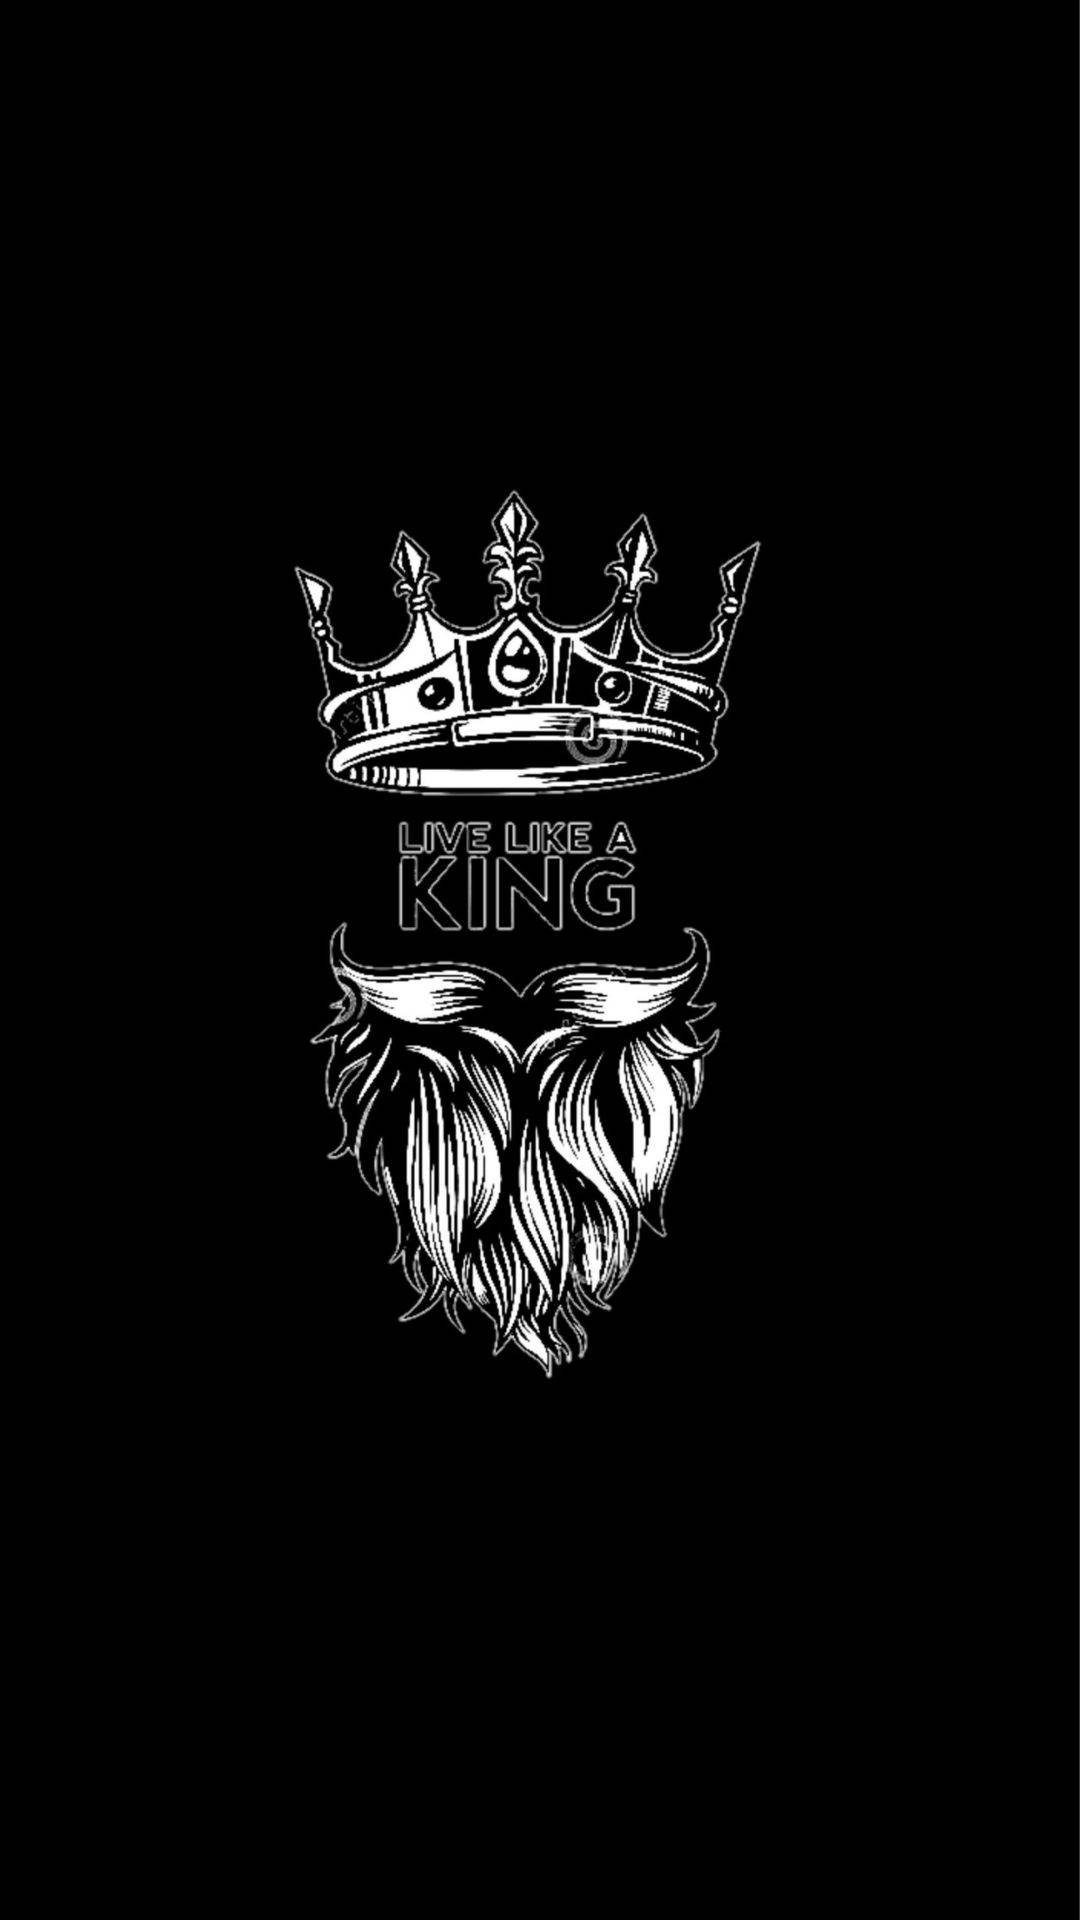 1080X1920 King Wallpaper and Background